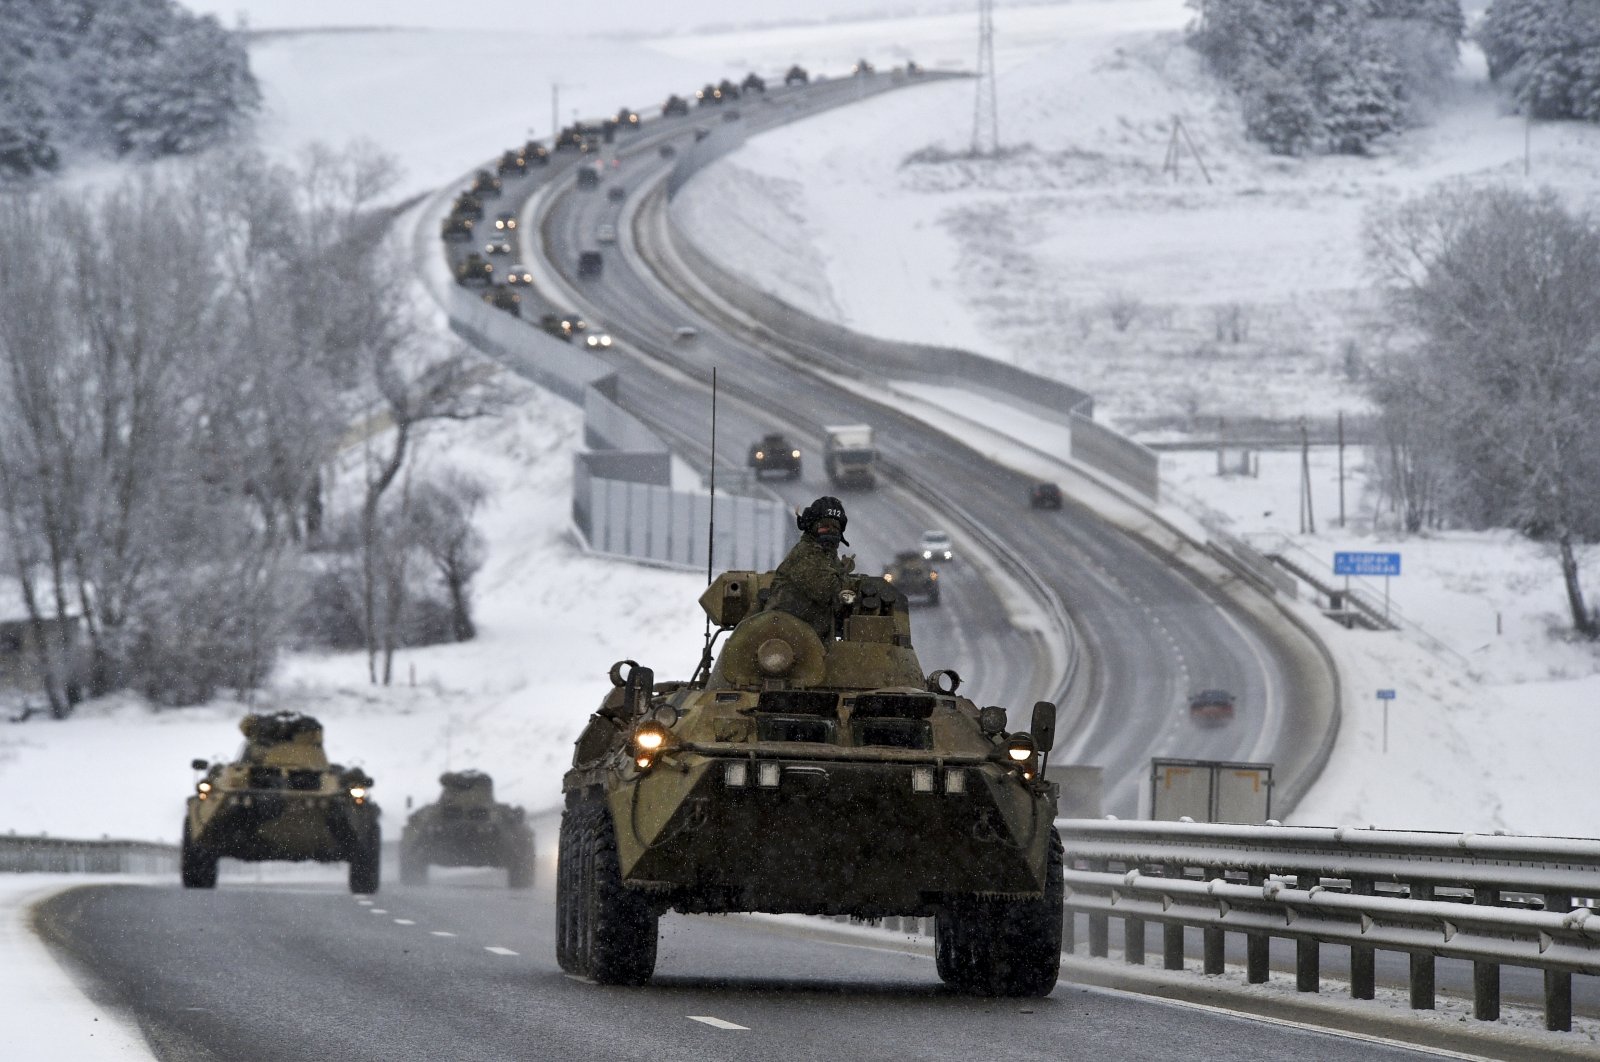 A convoy of Russian armored vehicles moves along a highway in Crimea, Ukraine, Jan. 18, 2022. (AP Photo)